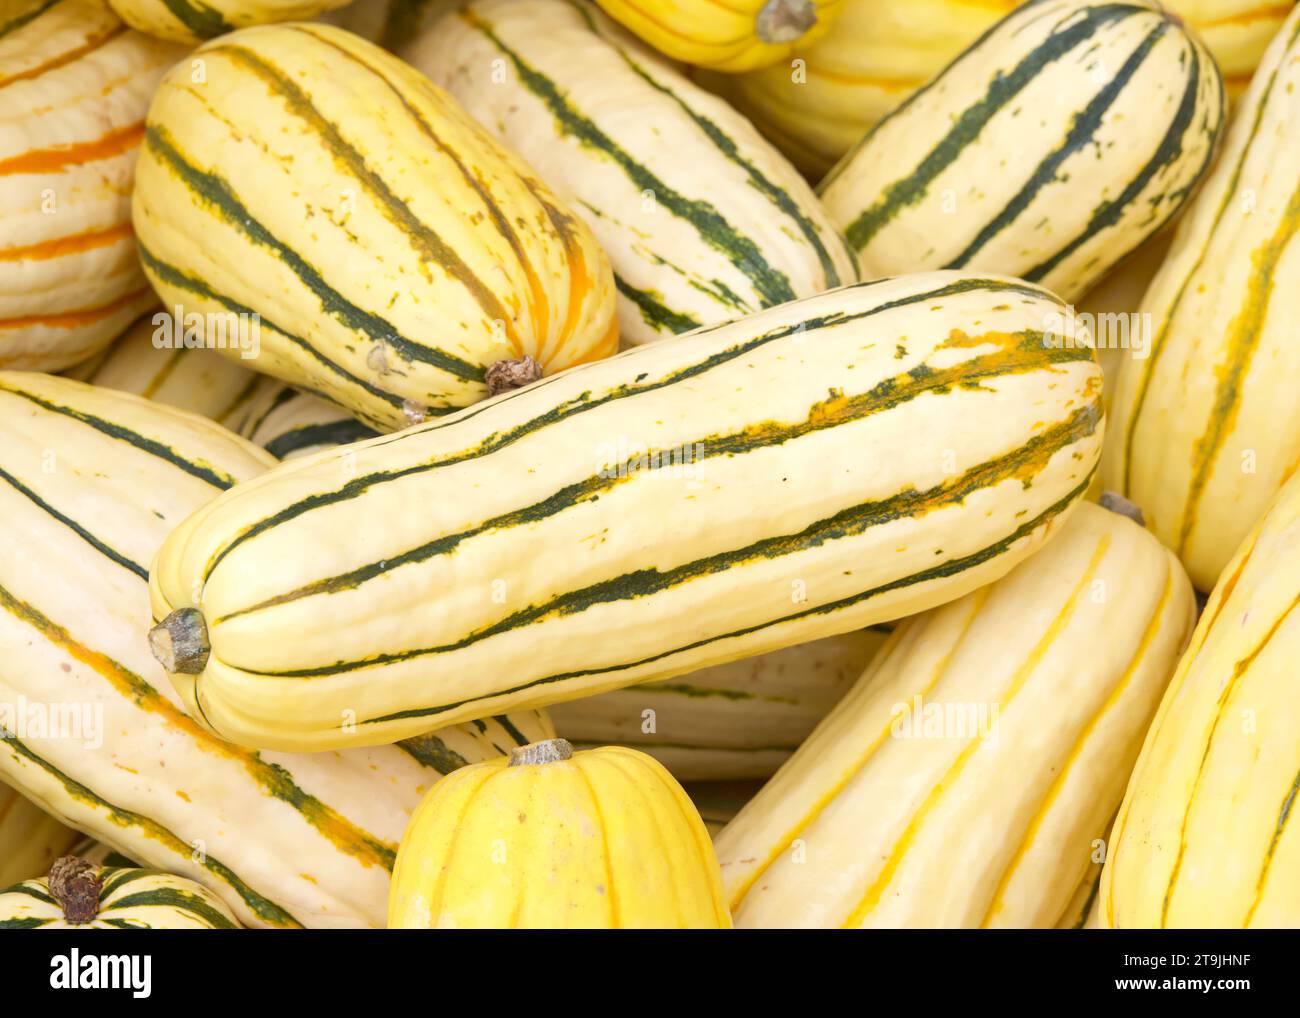 Close up on pile of freshly picked Delicata Squash piled for sale at farmers market. Stock Photo